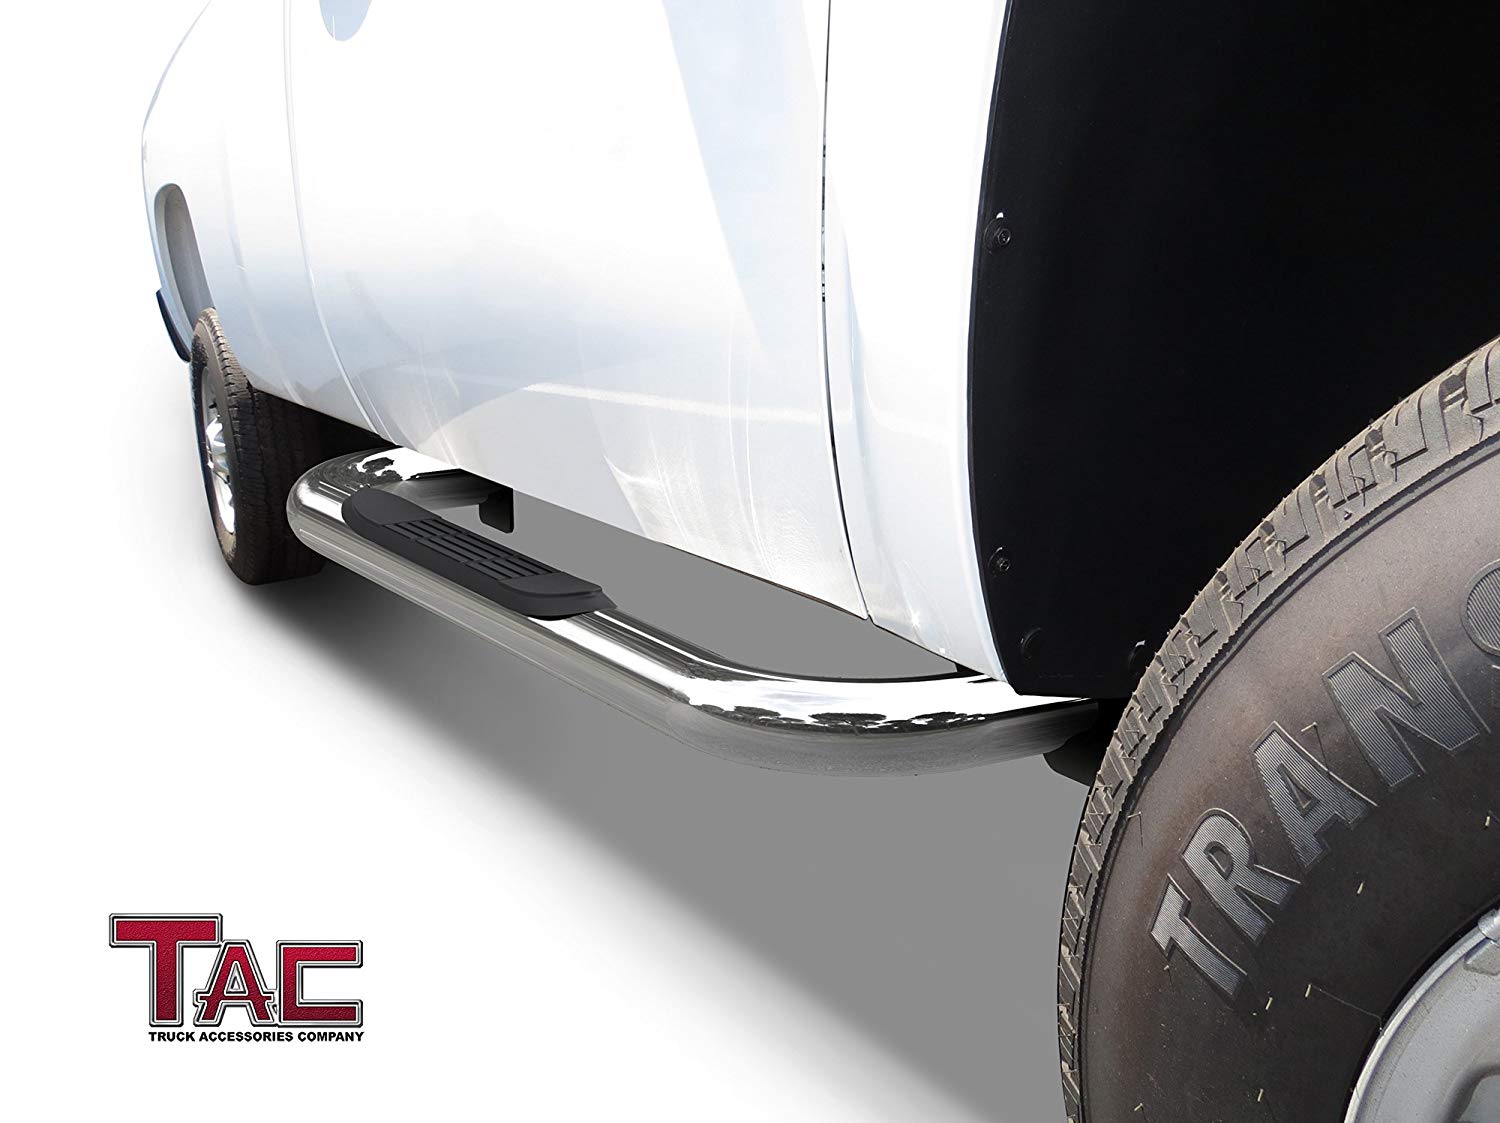 TAC Stainless Steel 3" Side Steps For 99-18 Chevy Silverado/GMC Sierra 1500/99-19 Silverado/Sierra 2500/3500 Regular Cab (Excl. C/K Classic) Truck | Running Boards | Nerf Bars | Side Bars - 0